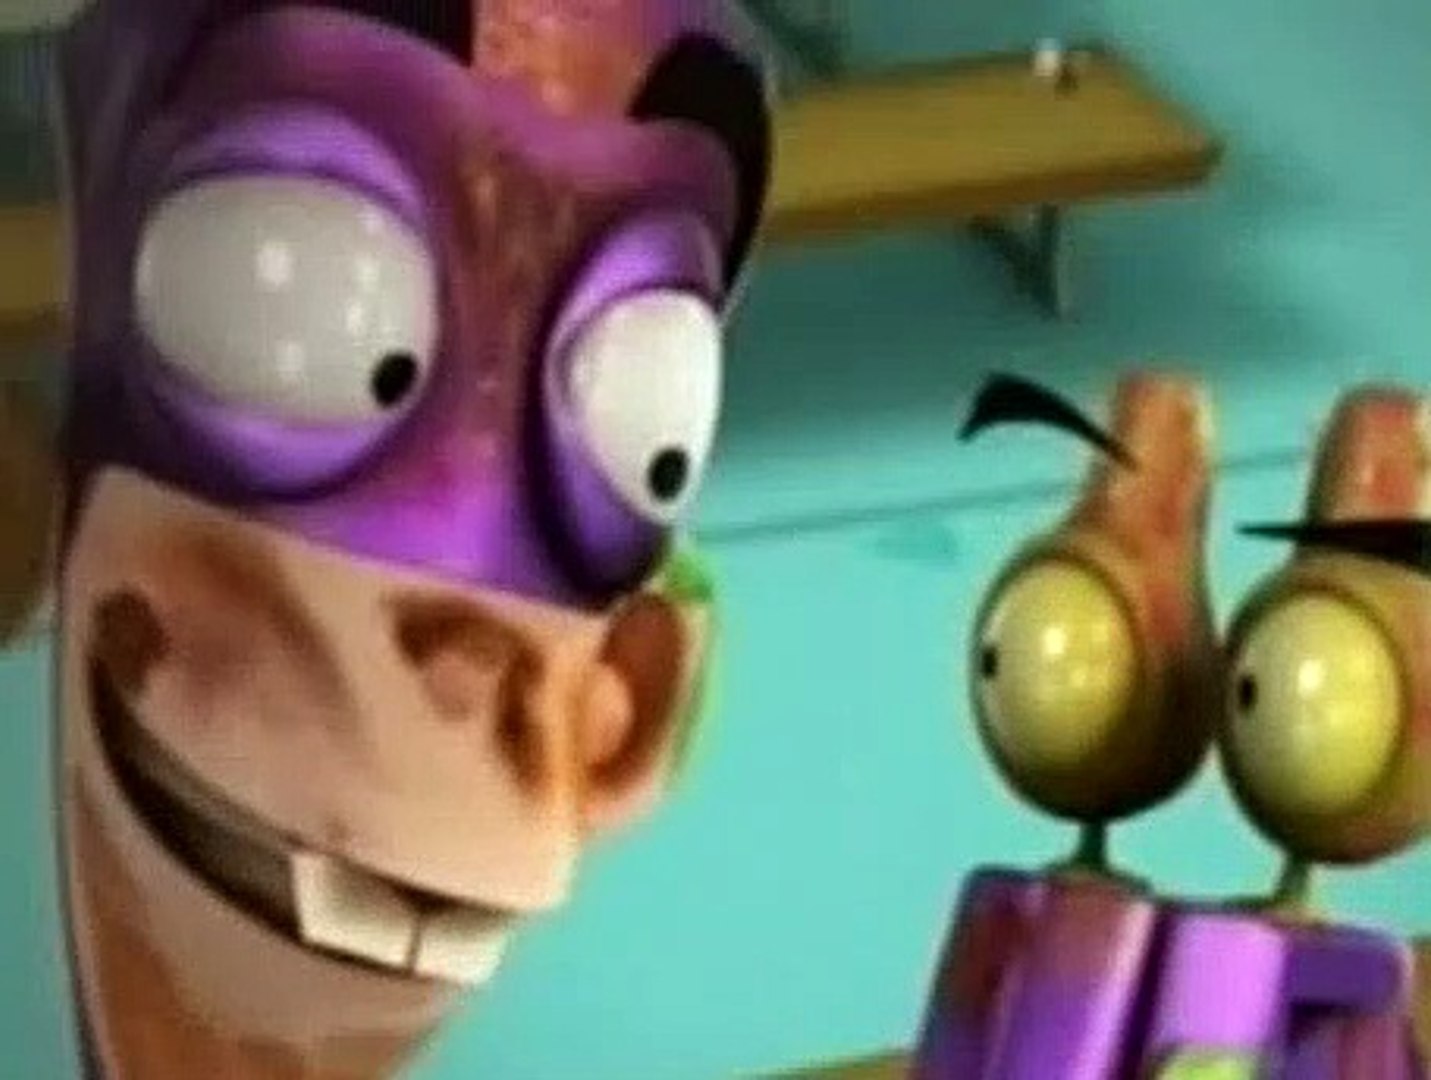 Fanboy And Chum Chum S01E1b Pick A Nose - video Dailymotion